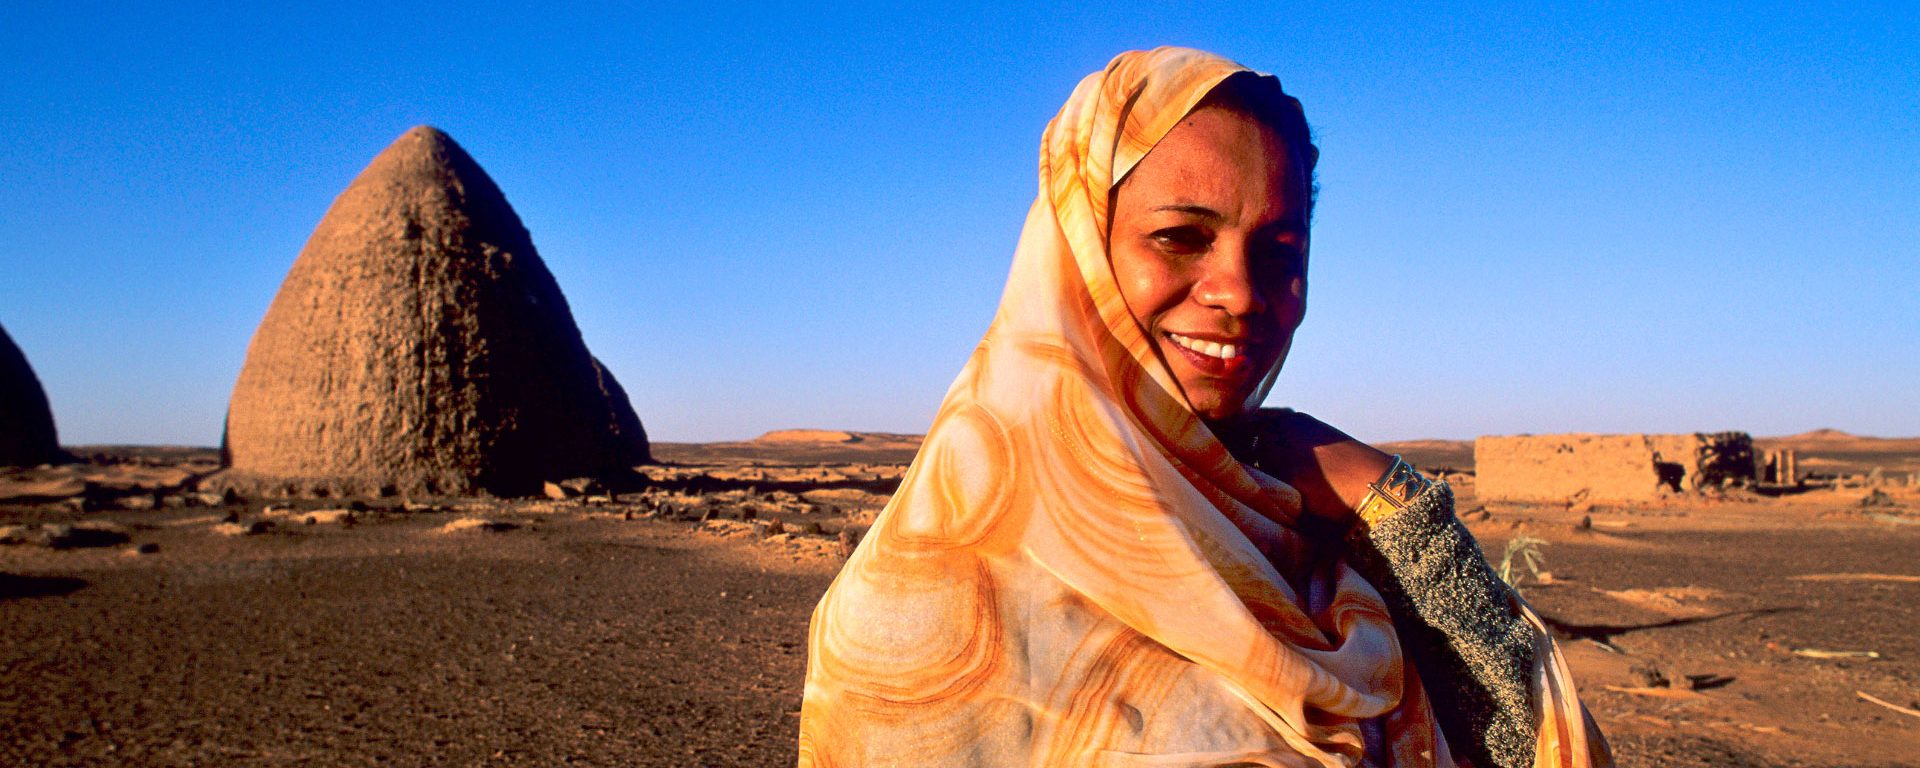 Nubian woman in front of domed structures in Old Dongola, Sudan